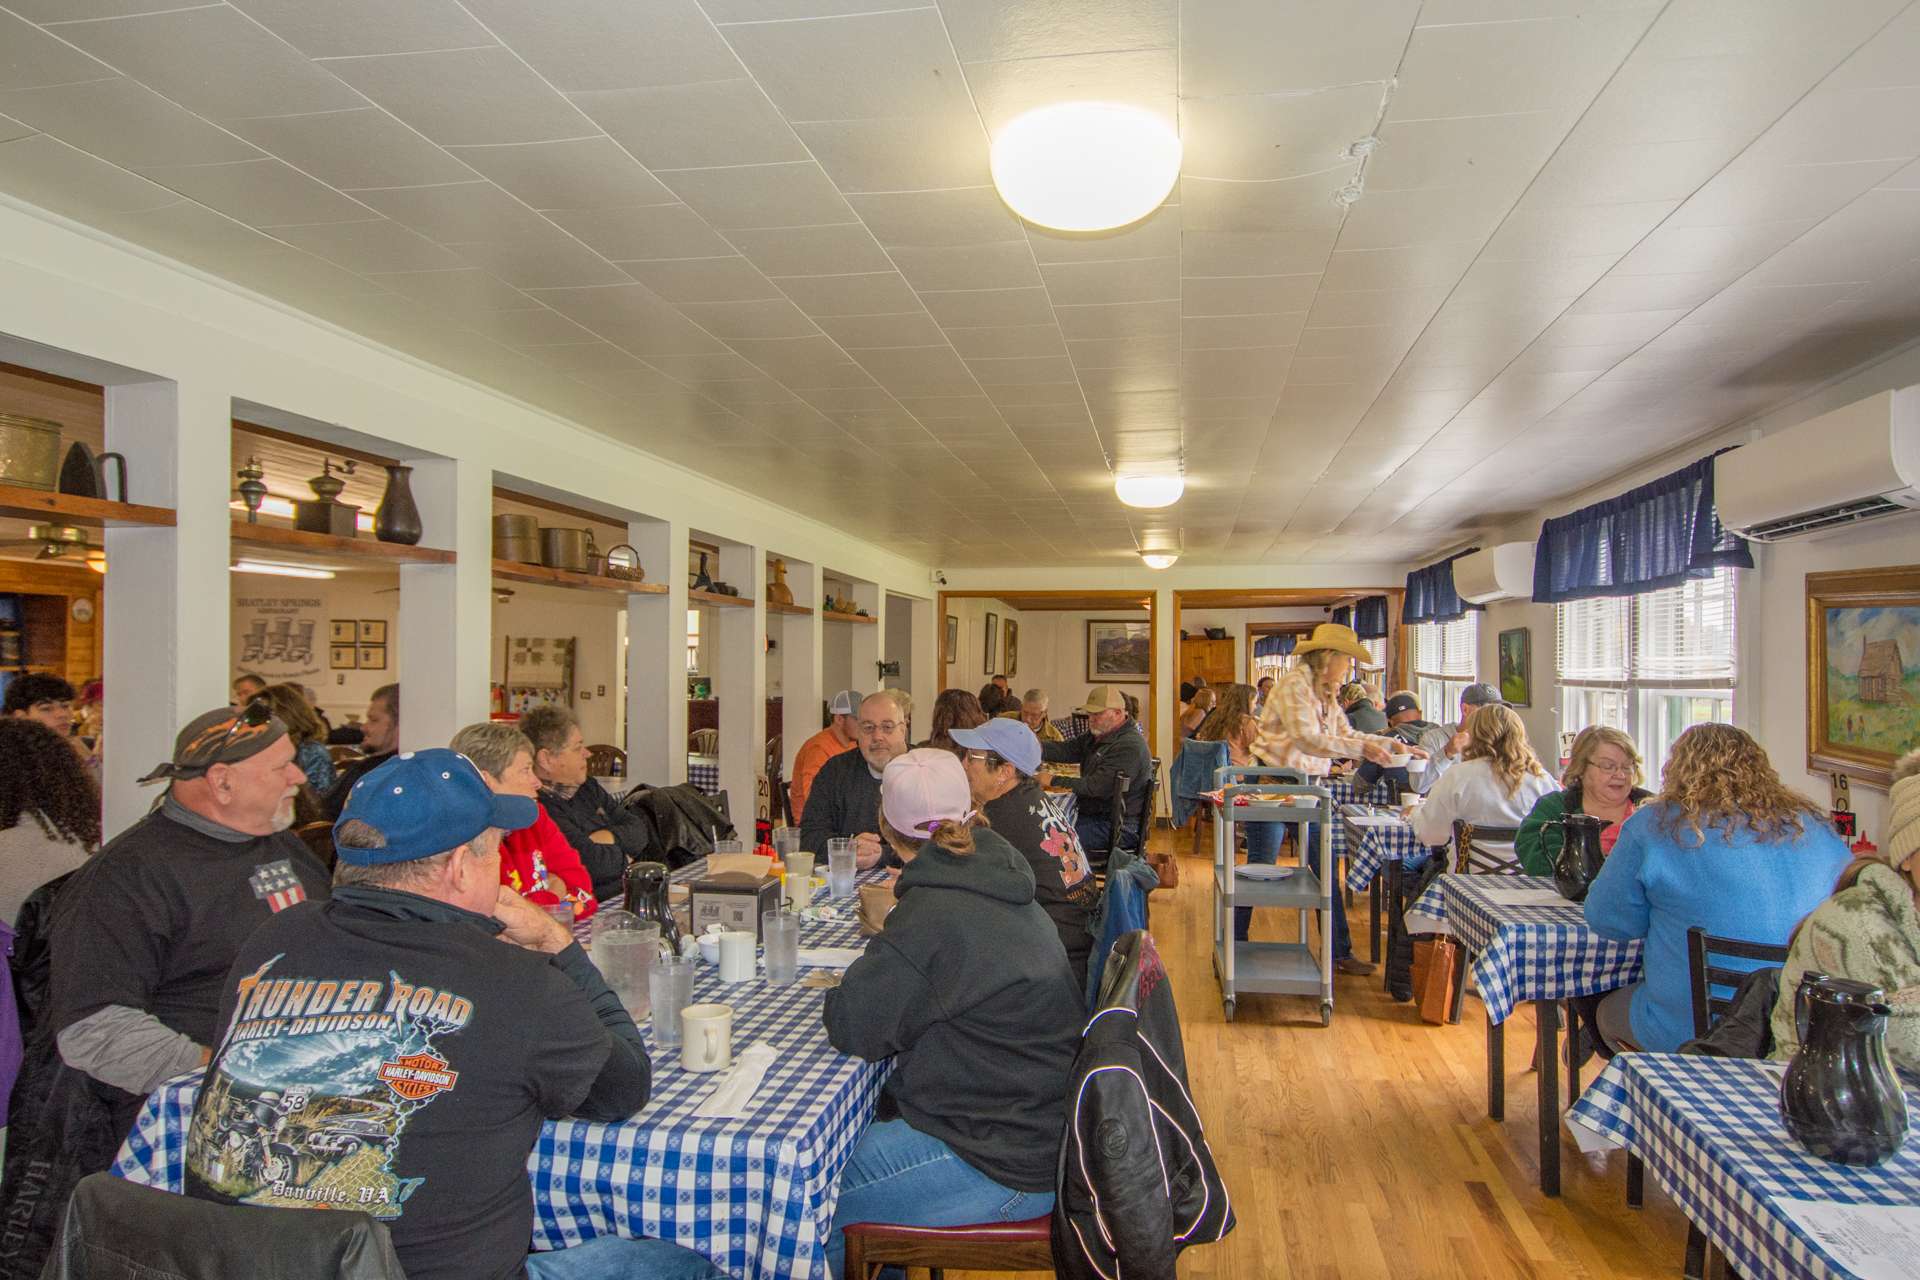 Shatley Springs Restaurant is a favorite yearly stop for many people from all over.